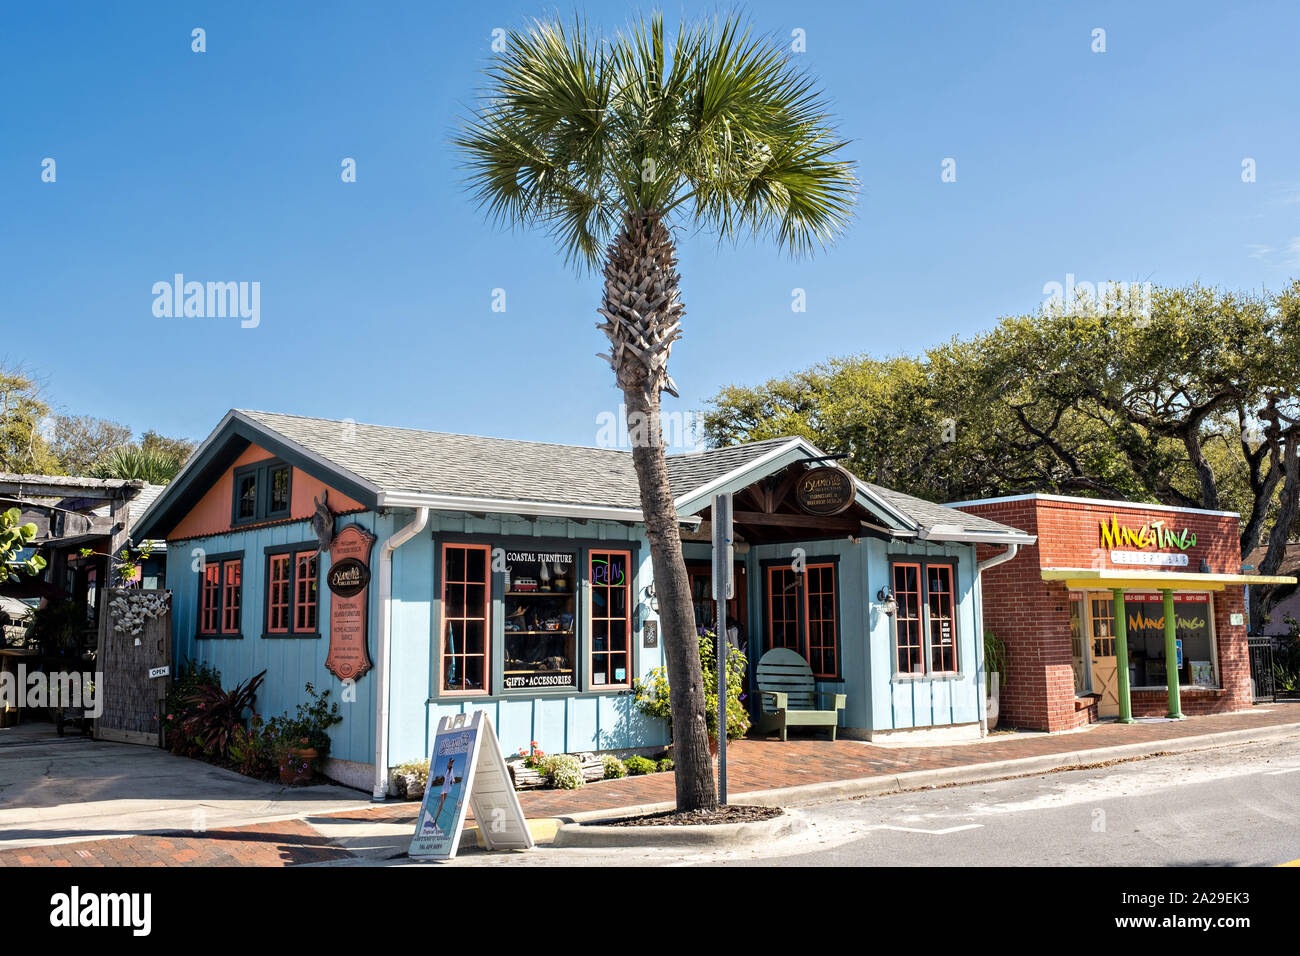 Eclectic Boutiques Along The Historic Flagler Avenue Shopping District In New Smyrna Beach Florida Stock Photo Alamy